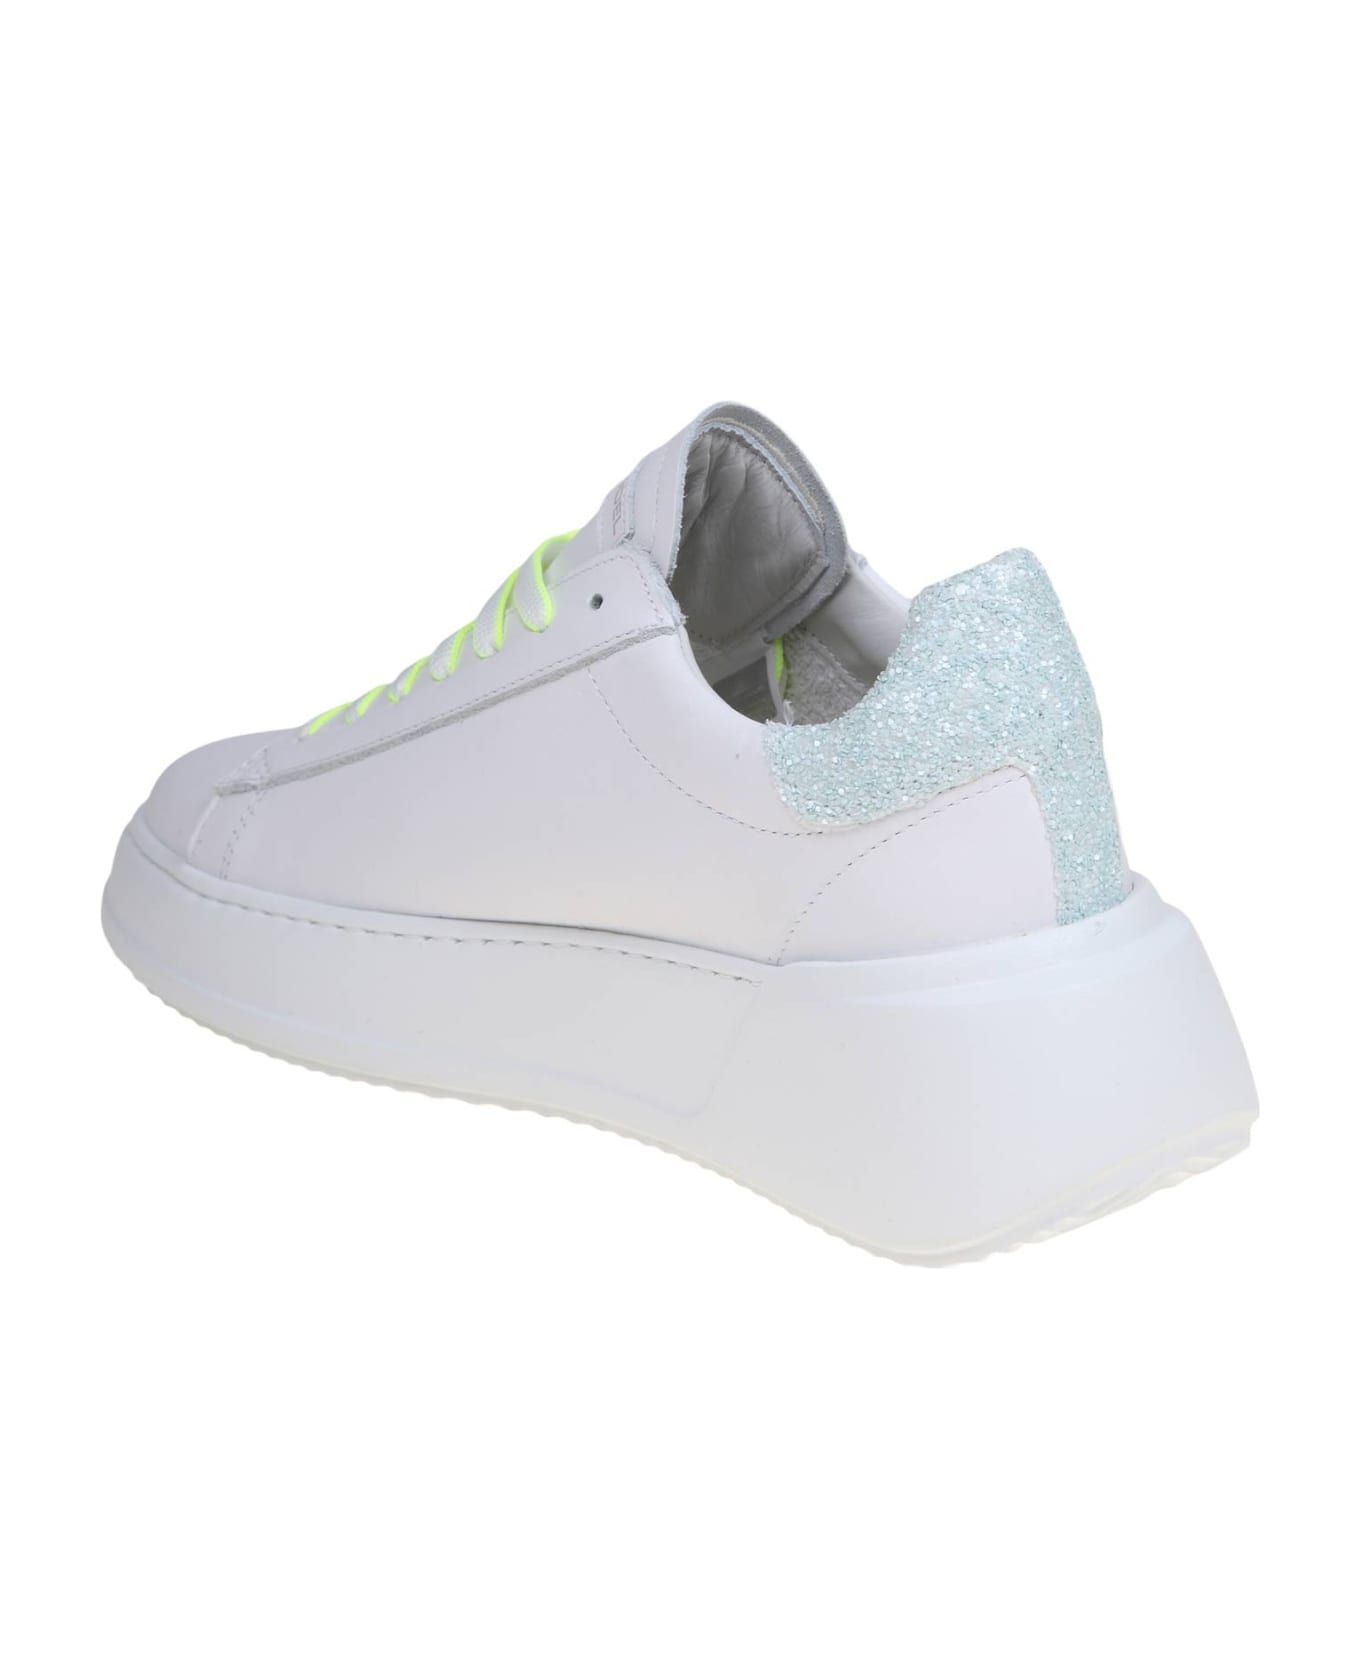 Philippe Model Tres Temple Low In White And Yellow Leather - Blanc/Jaune